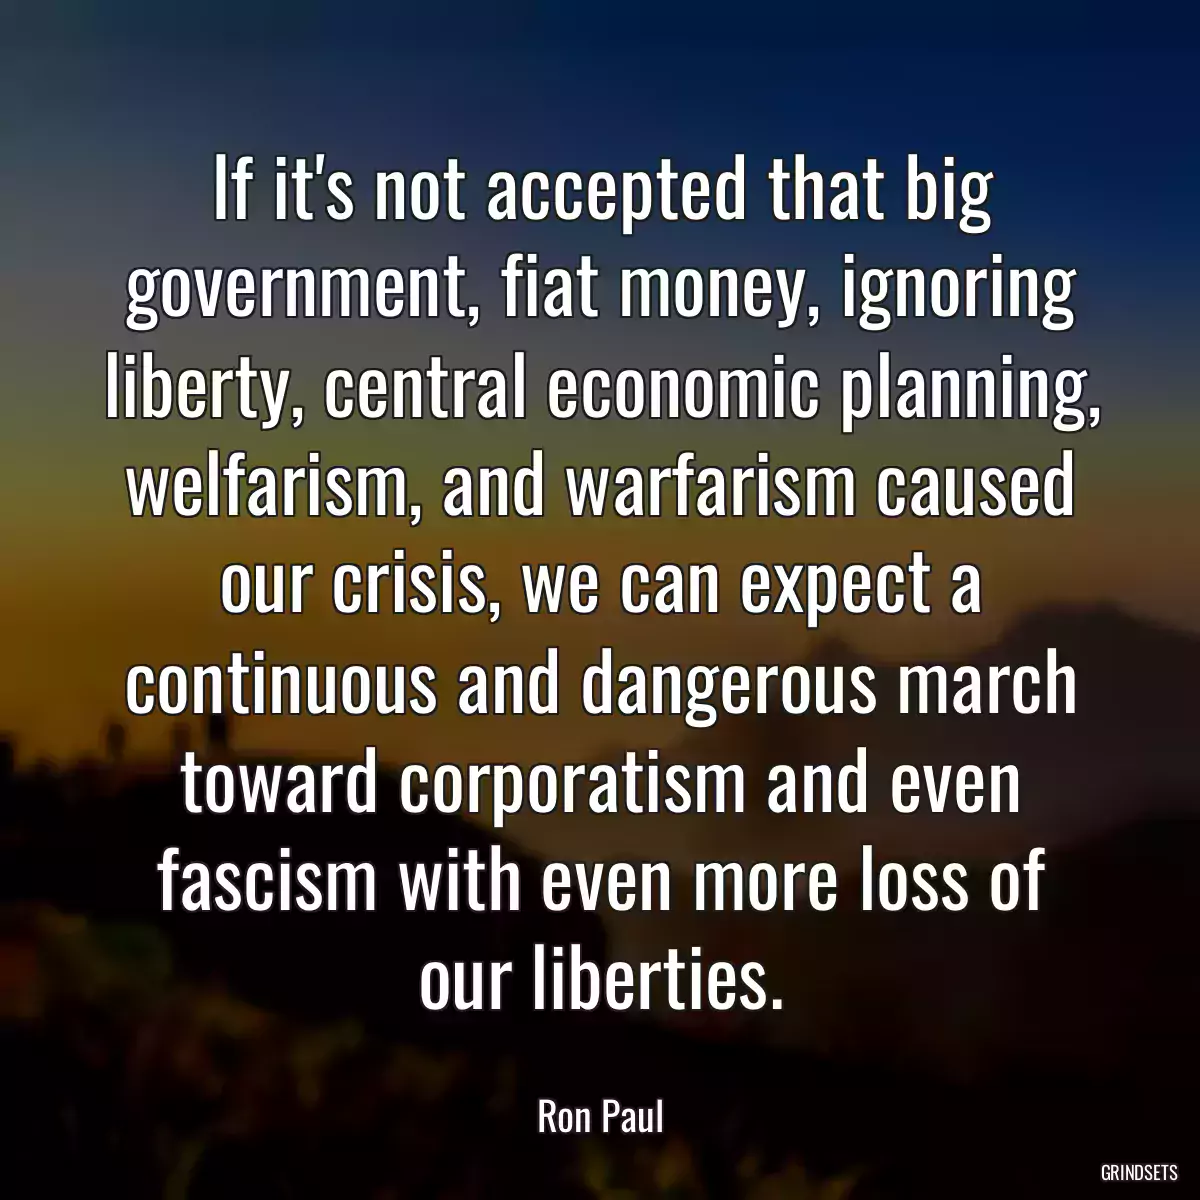 If it\'s not accepted that big government, fiat money, ignoring liberty, central economic planning, welfarism, and warfarism caused our crisis, we can expect a continuous and dangerous march toward corporatism and even fascism with even more loss of our liberties.